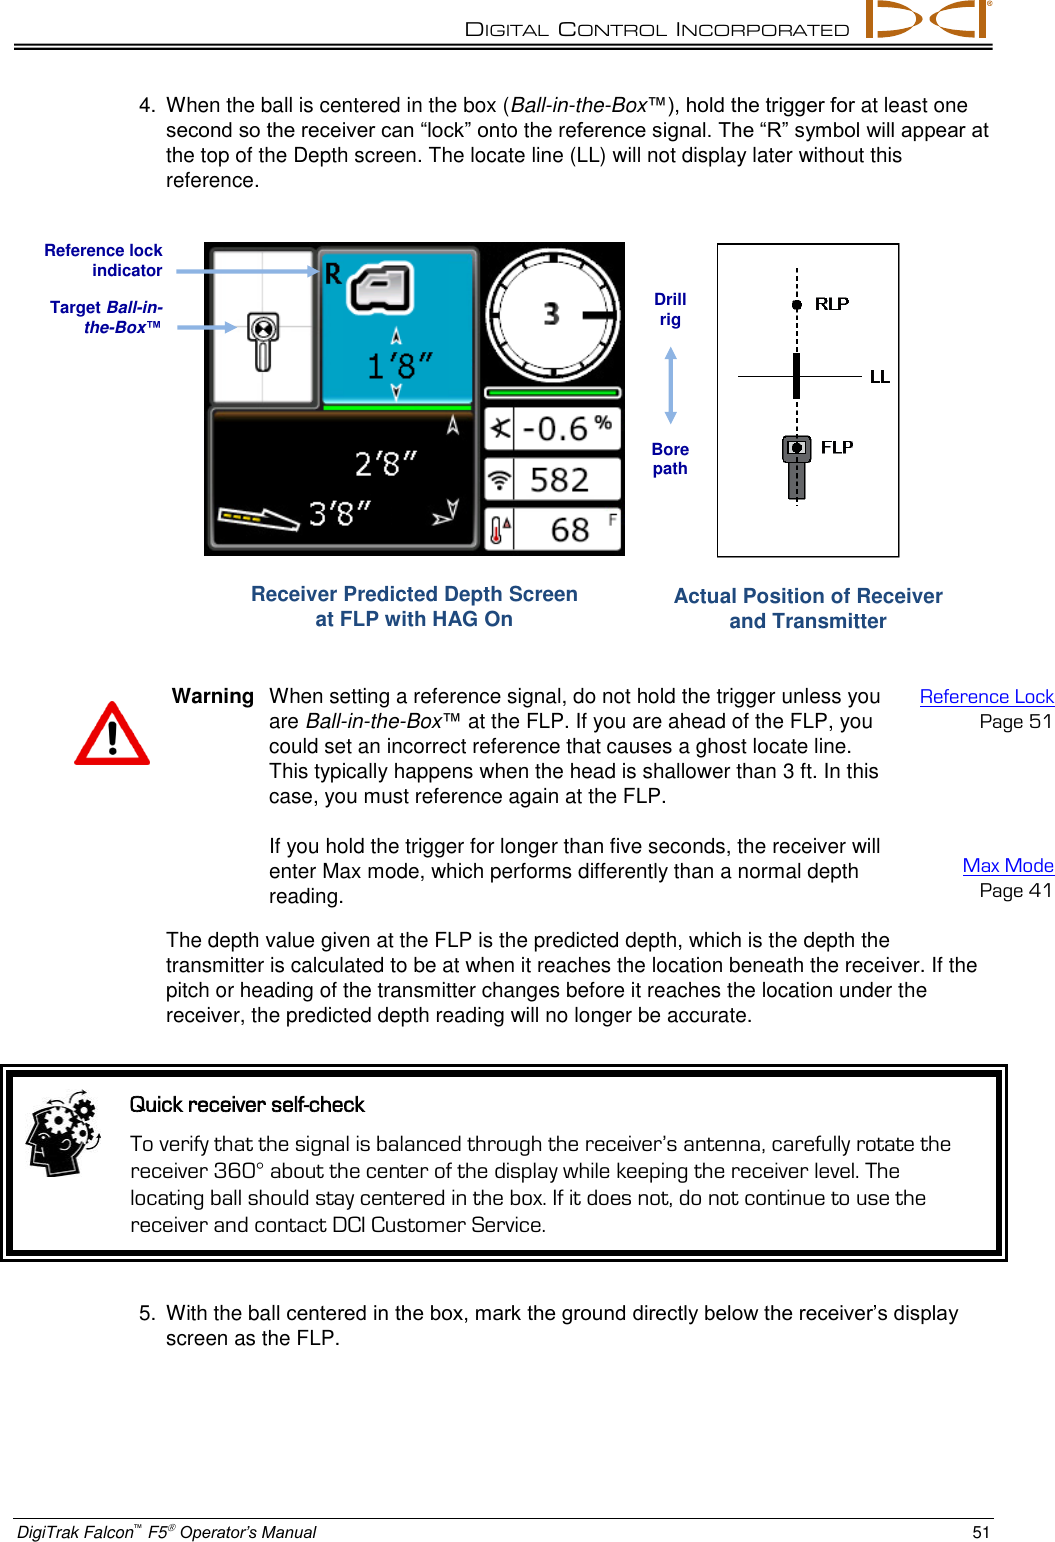 DIGITAL  CONTROL  INCORPORATED  DigiTrak Falcon™ F5 Operator’s Manual 51 4.  When the ball is centered in the box (Ball-in-the-Box™), hold the trigger for at least one second so the receiver can “lock” onto the reference signal. The “R” symbol will appear at the top of the Depth screen. The locate line (LL) will not display later without this reference.  Receiver Predicted Depth Screen  at FLP with HAG On  Actual Position of Receiver and Transmitter   Warning  When setting a reference signal, do not hold the trigger unless you are Ball-in-the-Box™ at the FLP. If you are ahead of the FLP, you could set an incorrect reference that causes a ghost locate line. This typically happens when the head is shallower than 3 ft. In this case, you must reference again at the FLP.  If you hold the trigger for longer than five seconds, the receiver will enter Max mode, which performs differently than a normal depth reading. Reference Lock Page 51     Max Mode Page 41 The depth value given at the FLP is the predicted depth, which is the depth the transmitter is calculated to be at when it reaches the location beneath the receiver. If the pitch or heading of the transmitter changes before it reaches the location under the receiver, the predicted depth reading will no longer be accurate.  Quick receiver self-check To verify that the signal is balanced through the receiver’s antenna, carefully rotate the receiver 360° about the center of the display while keeping the receiver level. The locating ball should stay centered in the box. If it does not, do not continue to use the receiver and contact DCI Customer Service. 5.  With the ball centered in the box, mark the ground directly below the receiver’s display screen as the FLP. Target Ball-in-the-Box™ Reference lock indicator Drill rig Bore path 